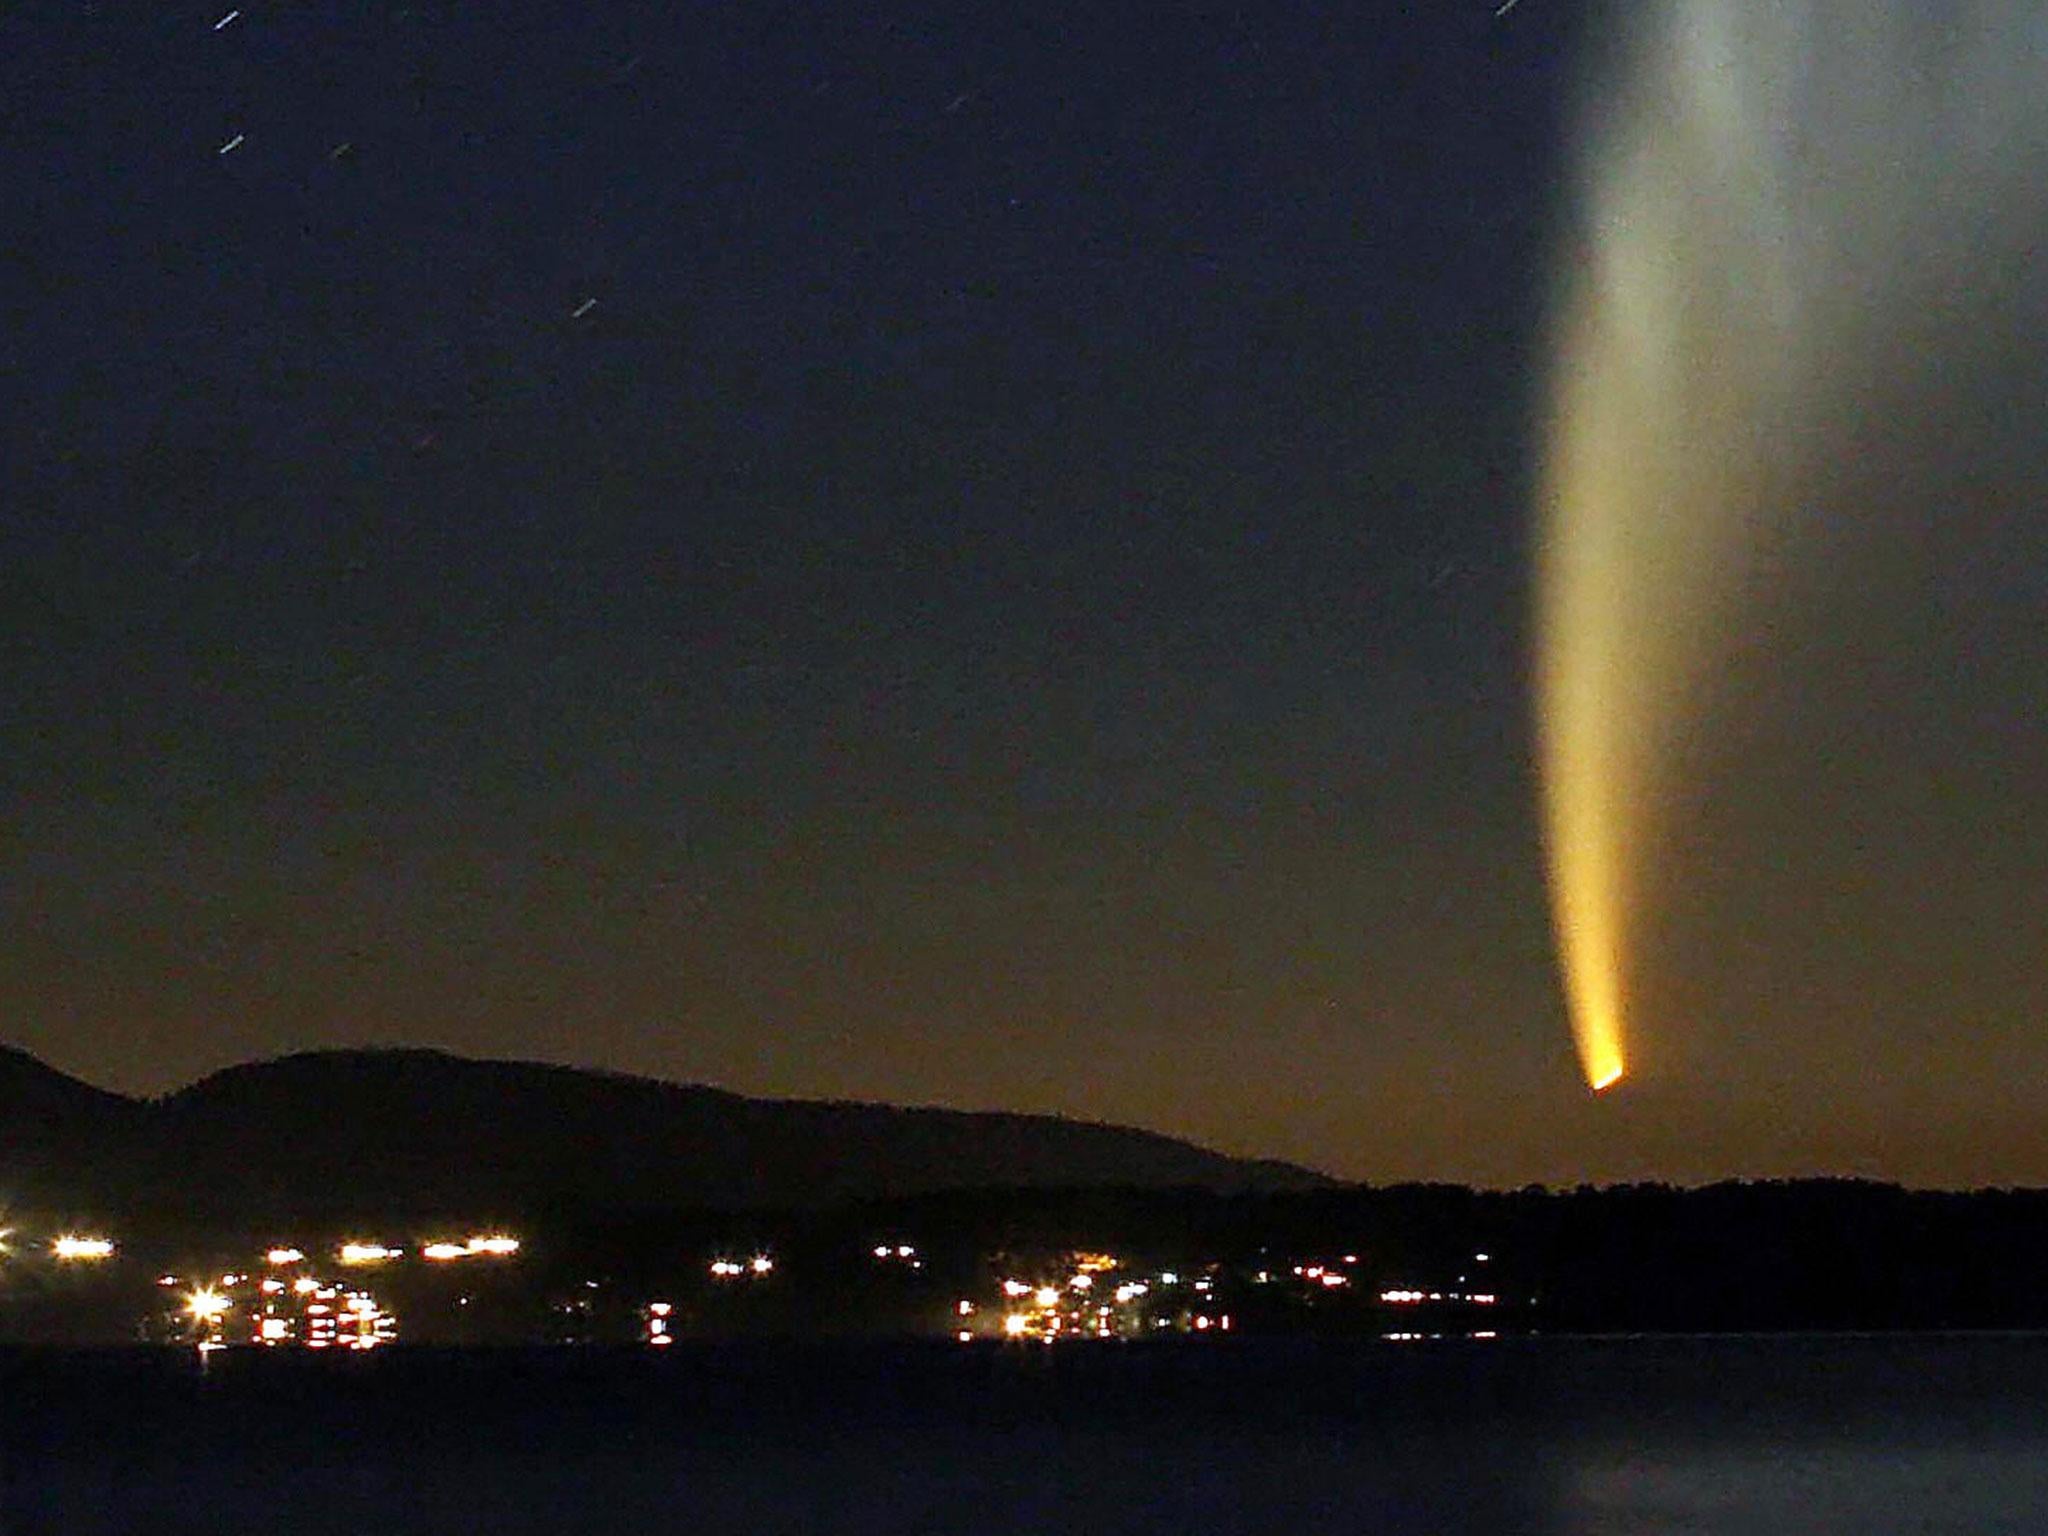 The McNaught comet, seen from Pucon, Chile, fortunately did not hit Earth